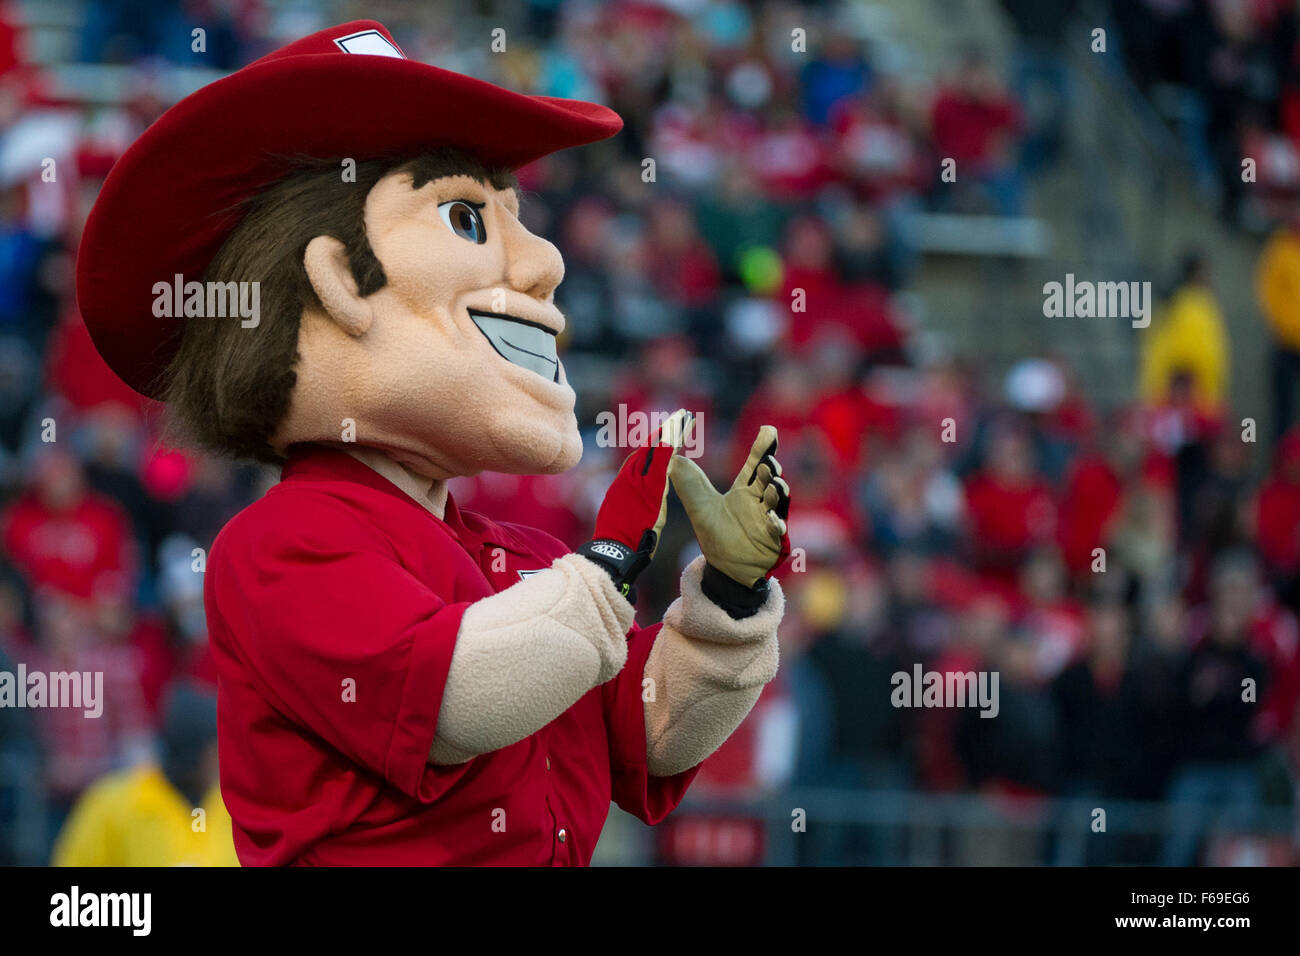 Piscataway, NJ, USA. 14th Nov, 2015. The Nebraska Cornhuskers mascot performs during the game between The Nebraska Cornhuskers and Rutgers Scarlet Knights at Highpoint Solutions Stadium in Piscataway, NJ. The Nebraska Cornhuskers defeat The Rutgers Scarlet Knights 31-14. Mandatory Credit: Kostas Lymperopoulos/CSM, Credit:  csm/Alamy Live News Stock Photo